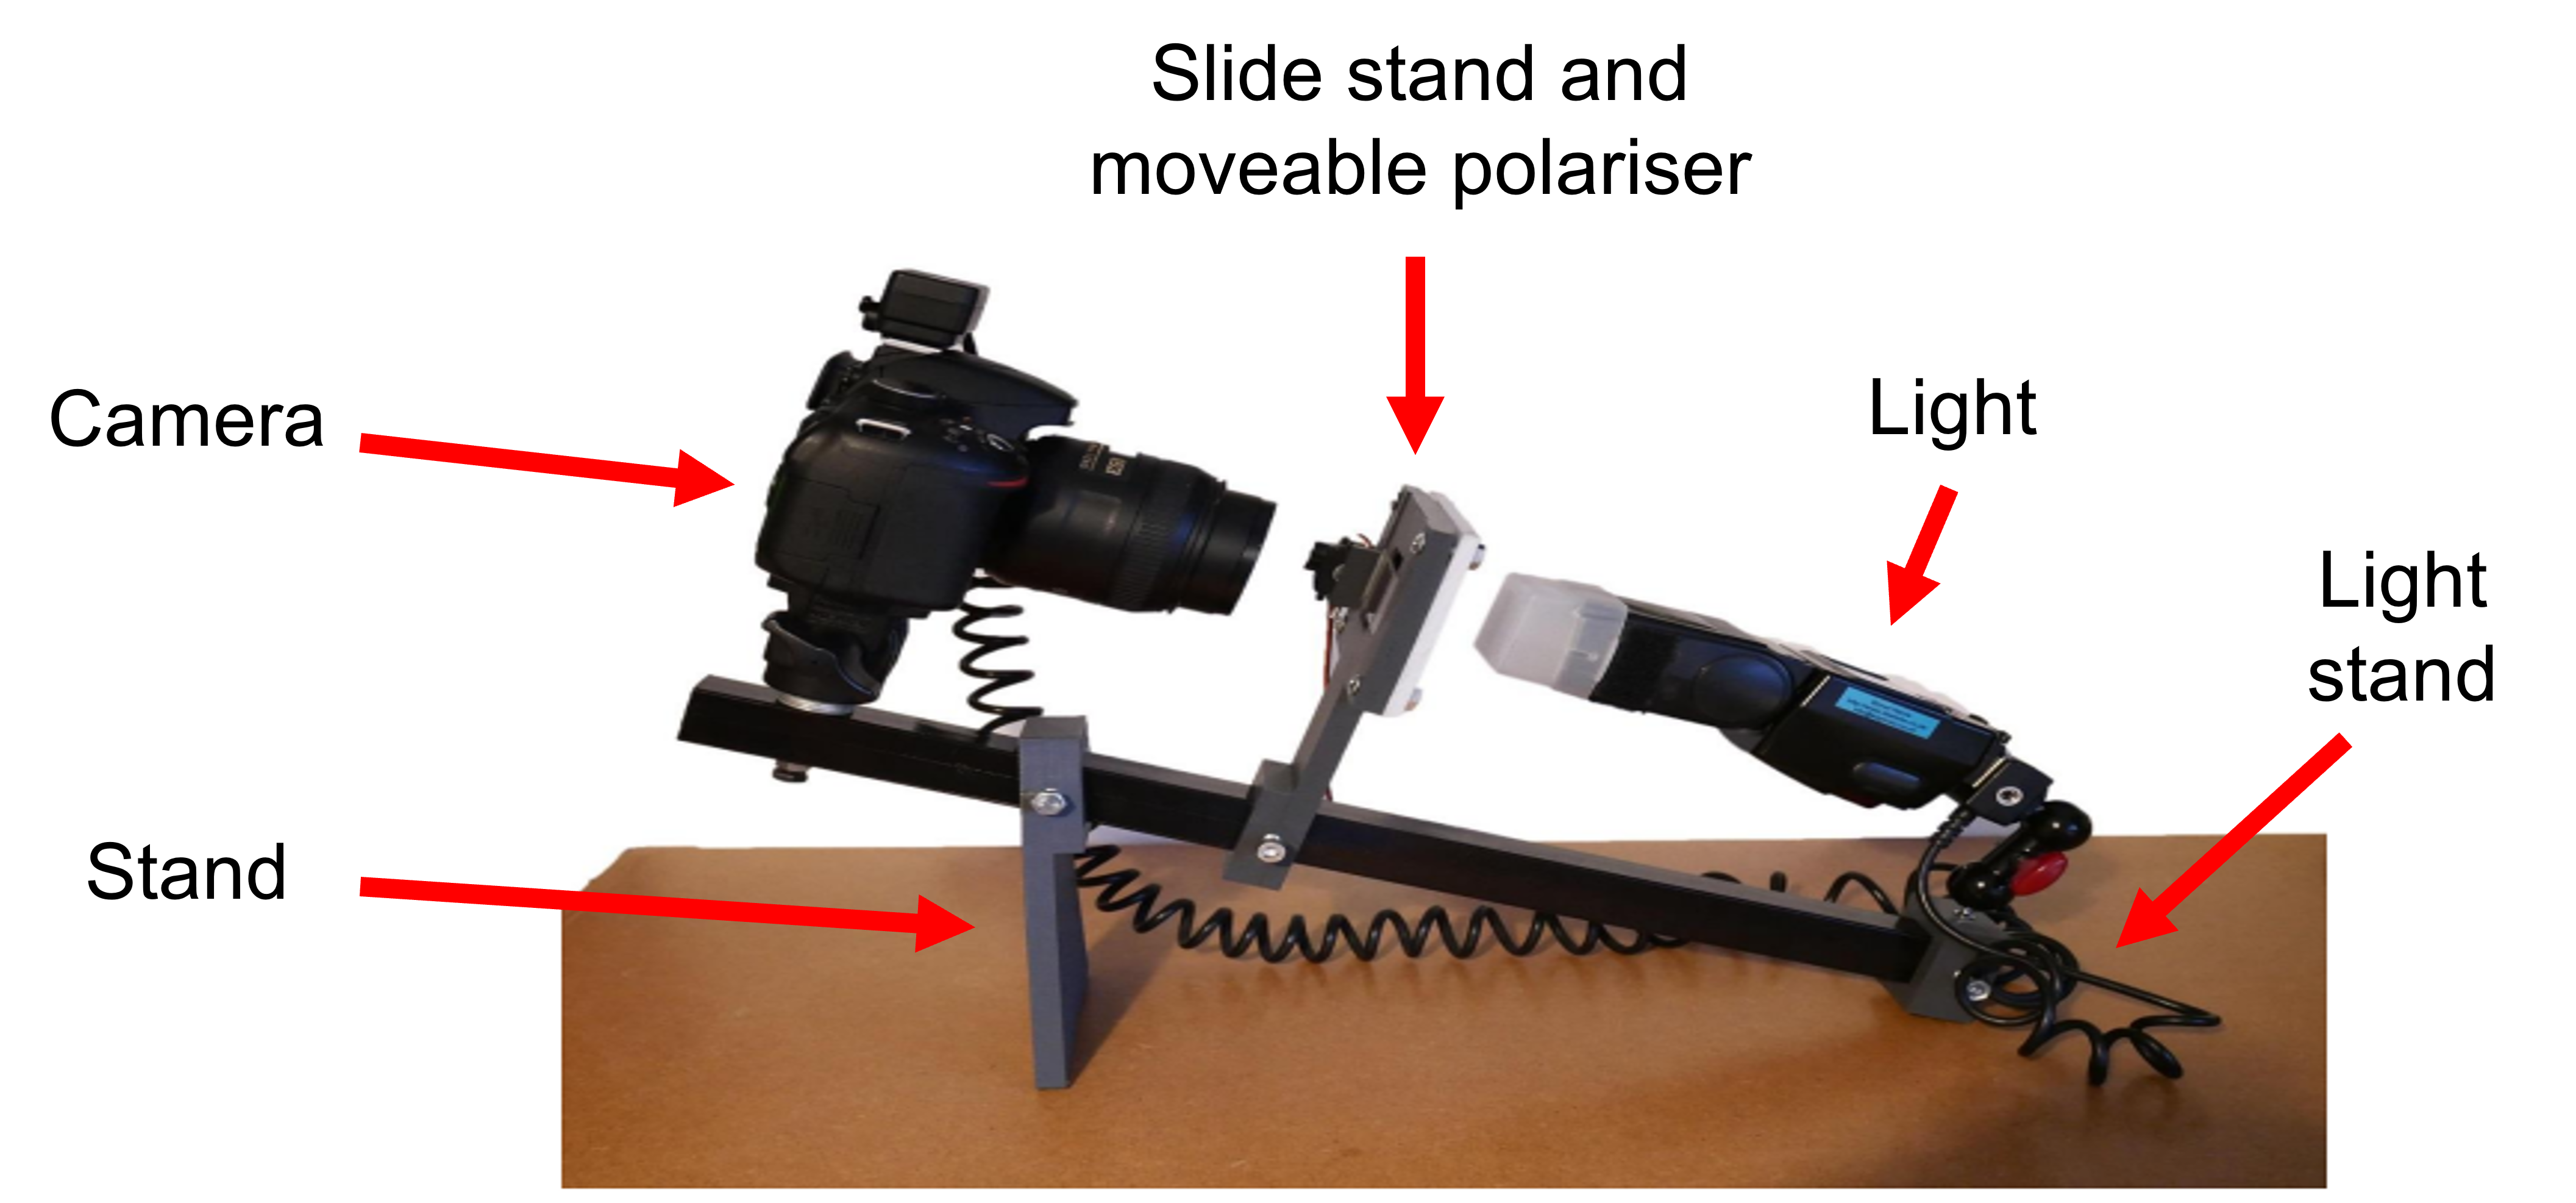 shows how to set up the camera with 3D printed parts